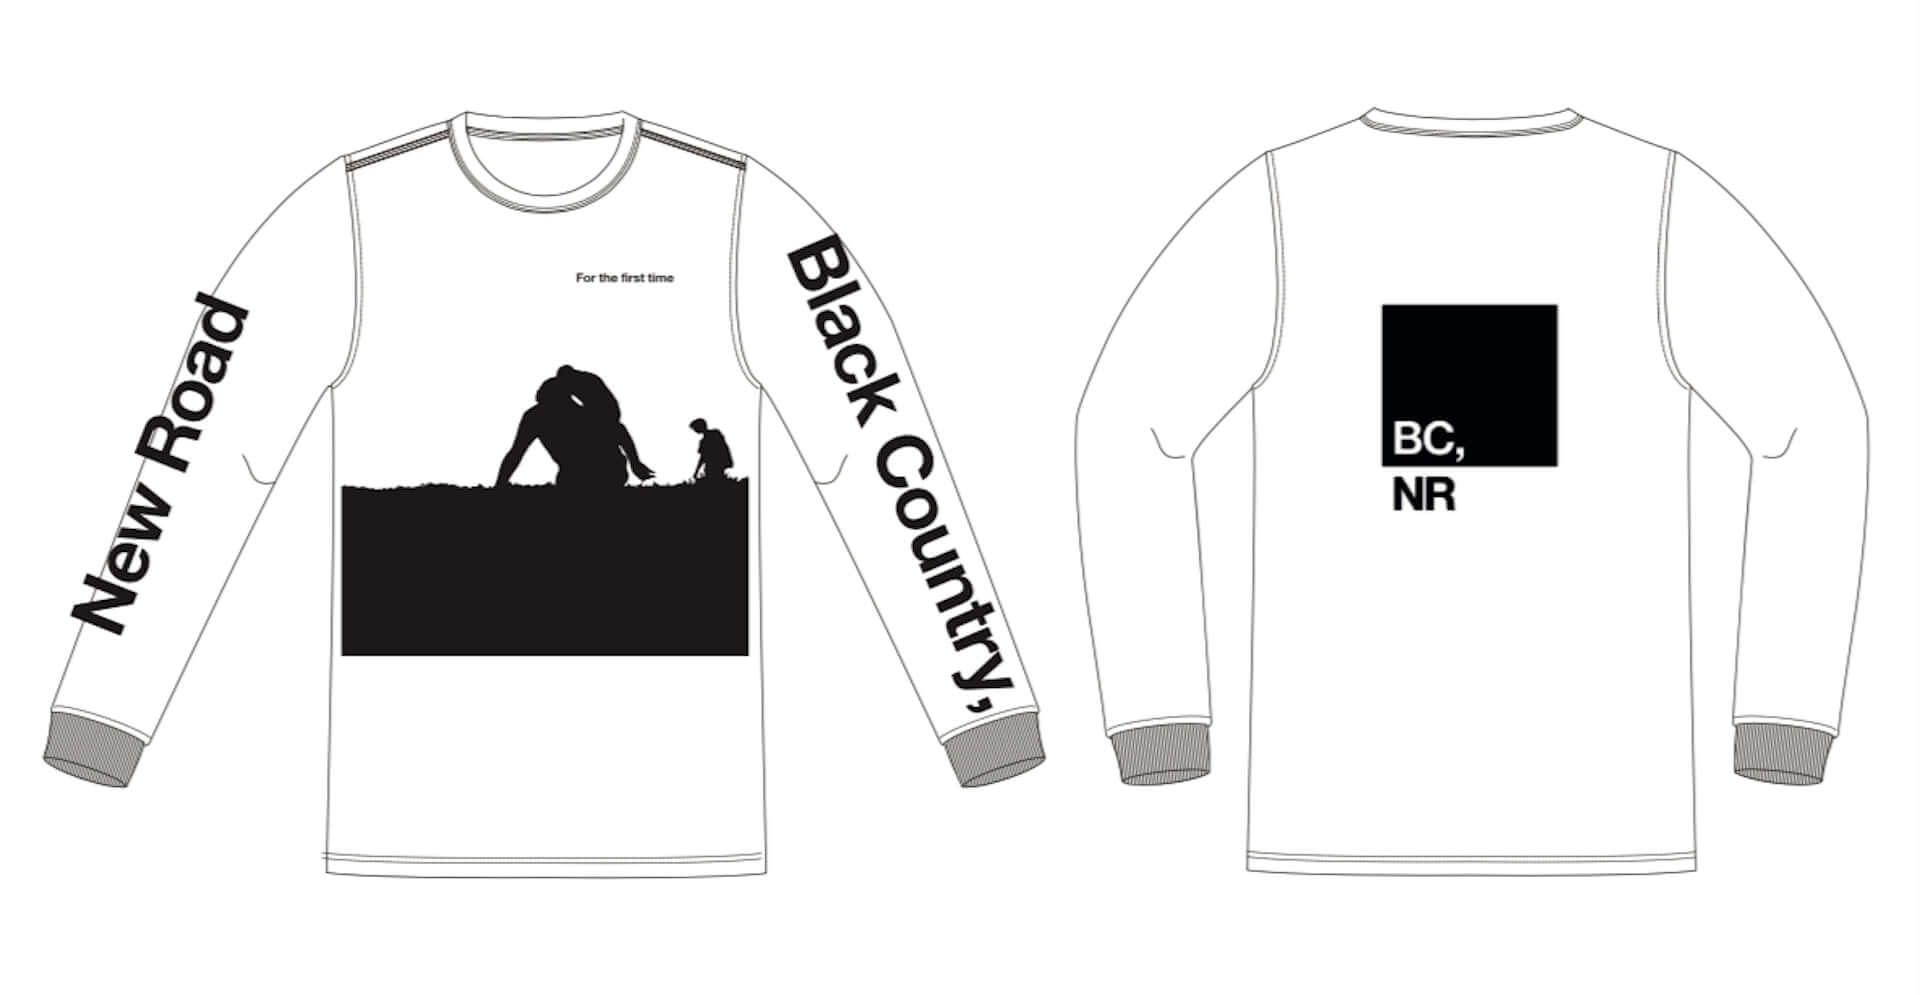 Black Country, New Roadのデビュー作『For the first time』がリリース！〈BIG LOVE RECORDS〉とのコラボTシャツも発売 music210205_bcnr_1-1920x995